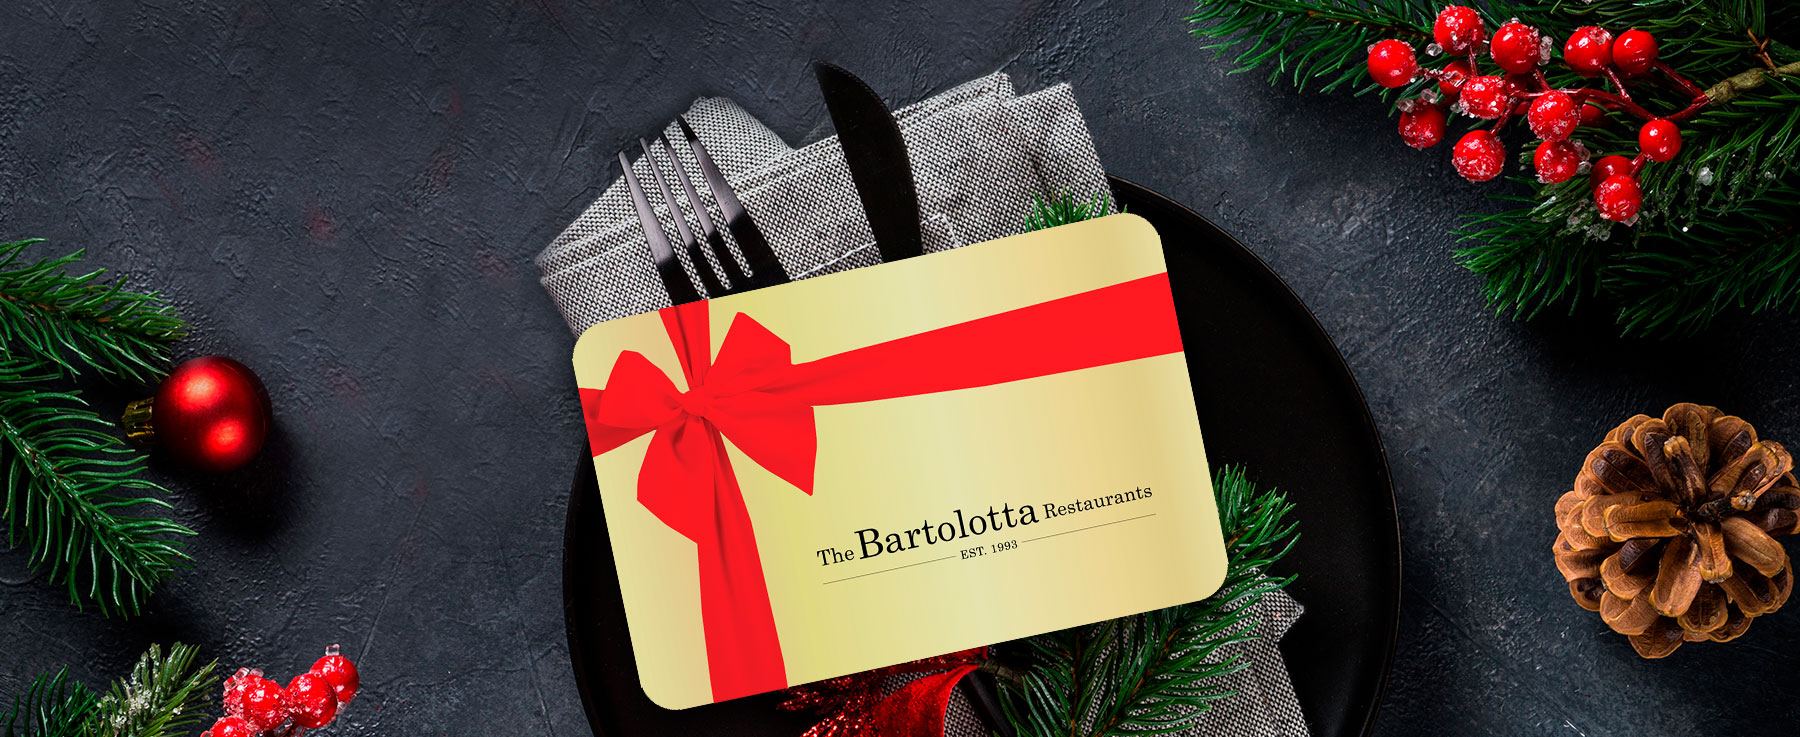 GIVE THE GIFT OF A BARTOLOTTA EXPERIENCE FOR THE HOLIDAY